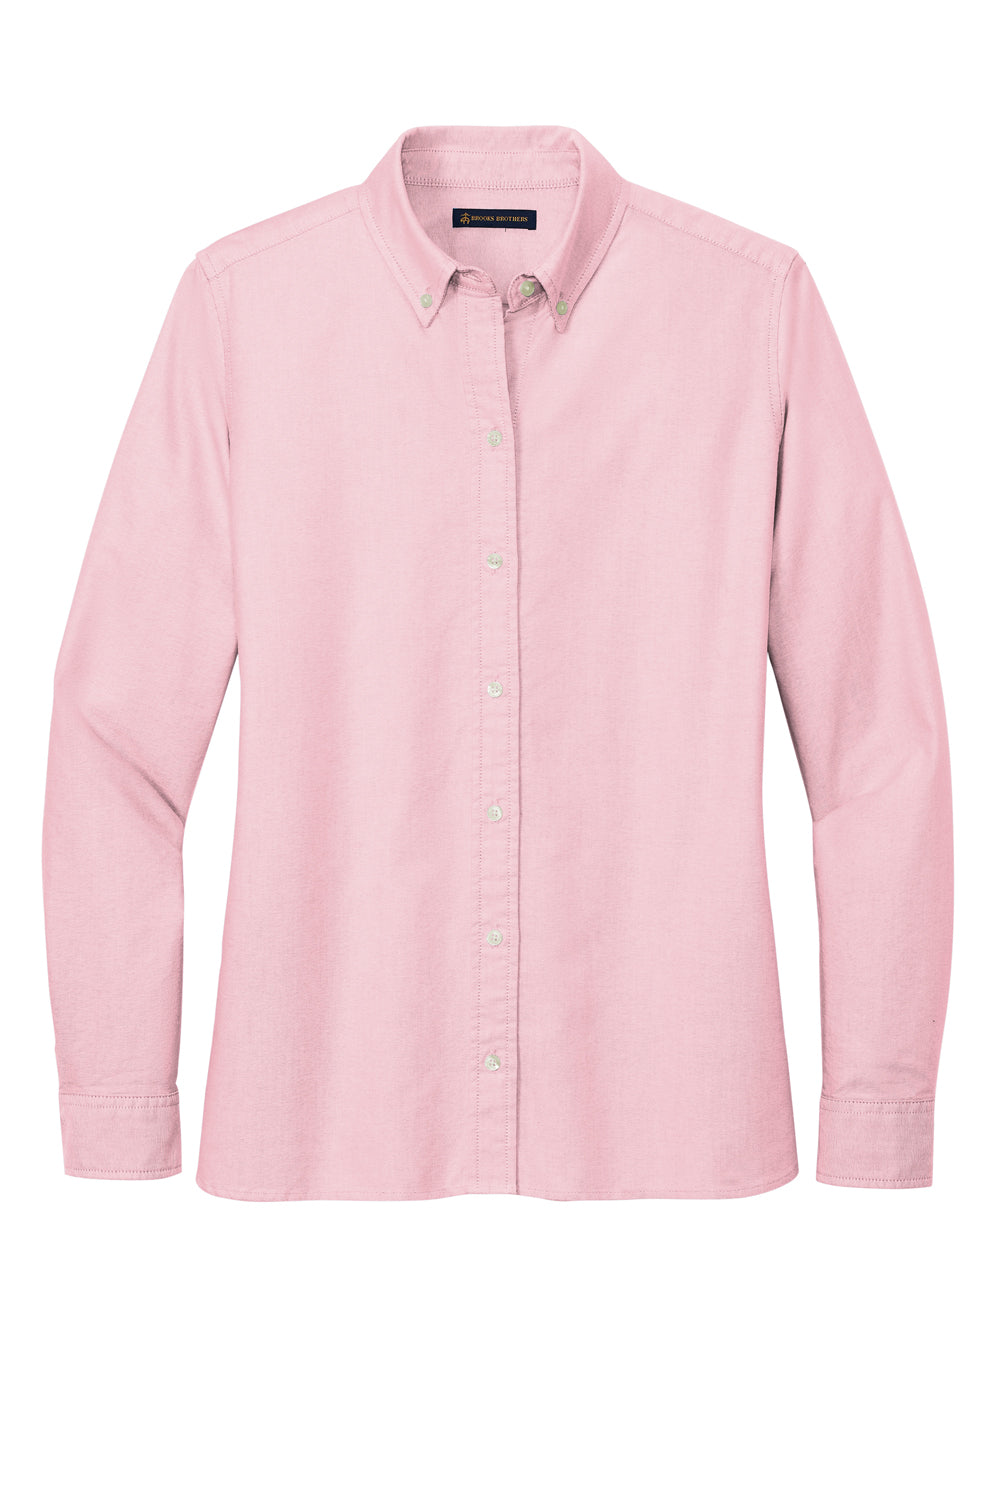 Brooks Brothers Womens Casual Oxford Long Sleeve Button Down Shirt Soft Pink Flat Front